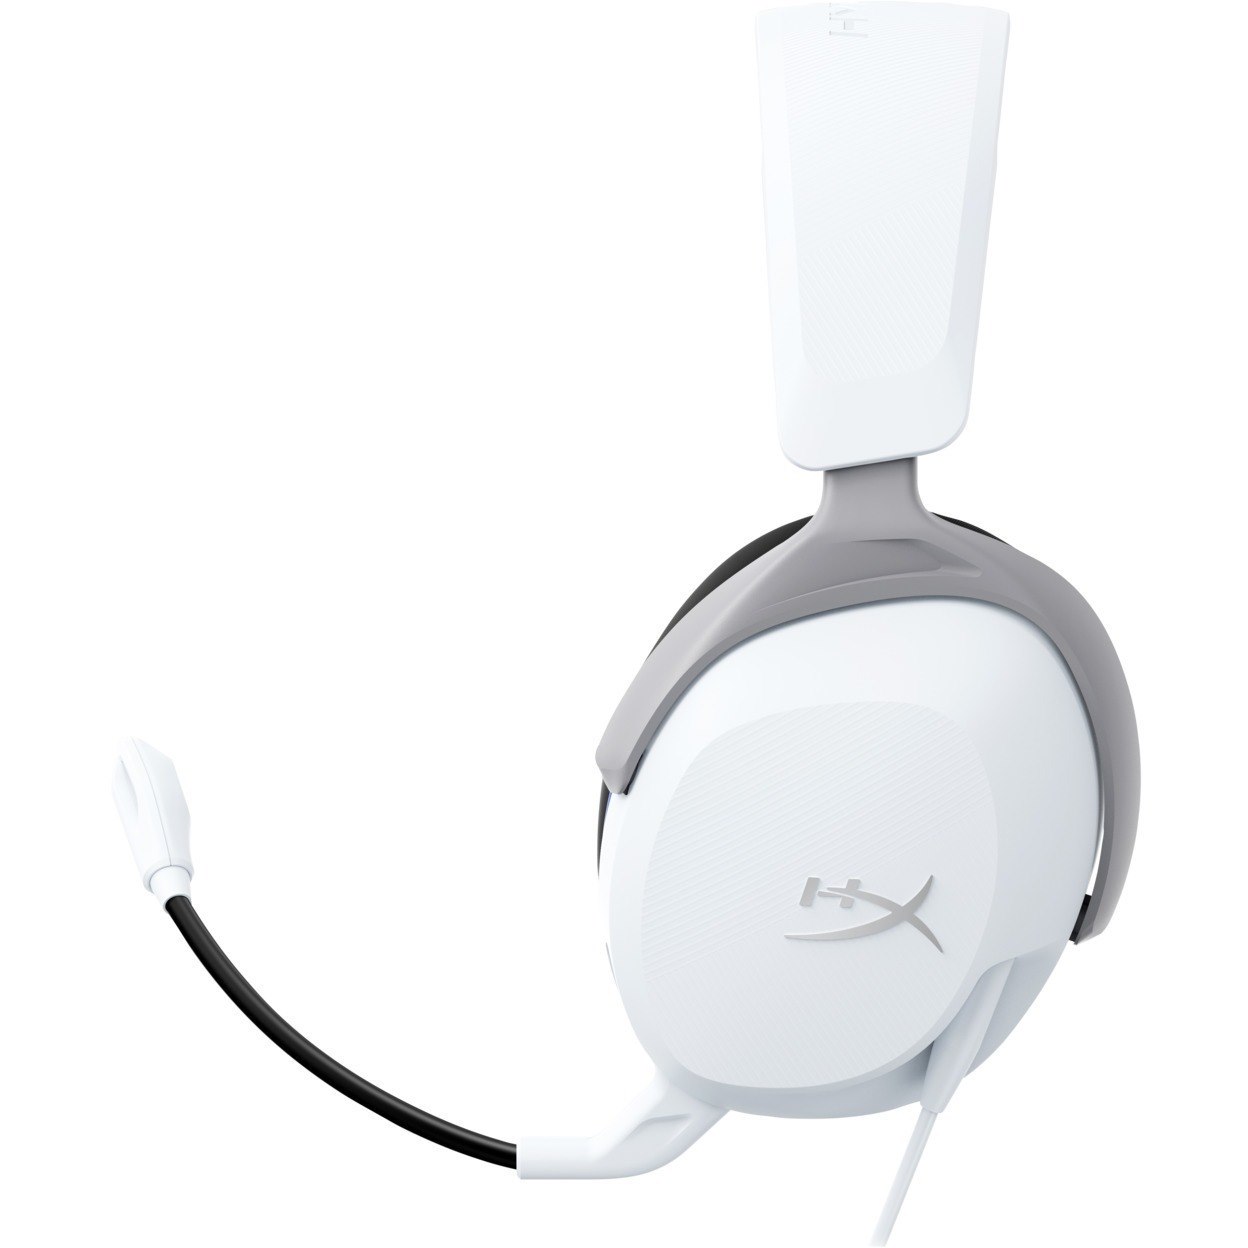 HyperX Cloud Stinger 2 Core Wired Over-the-ear, Over-the-head Stereo Gaming Headset - White